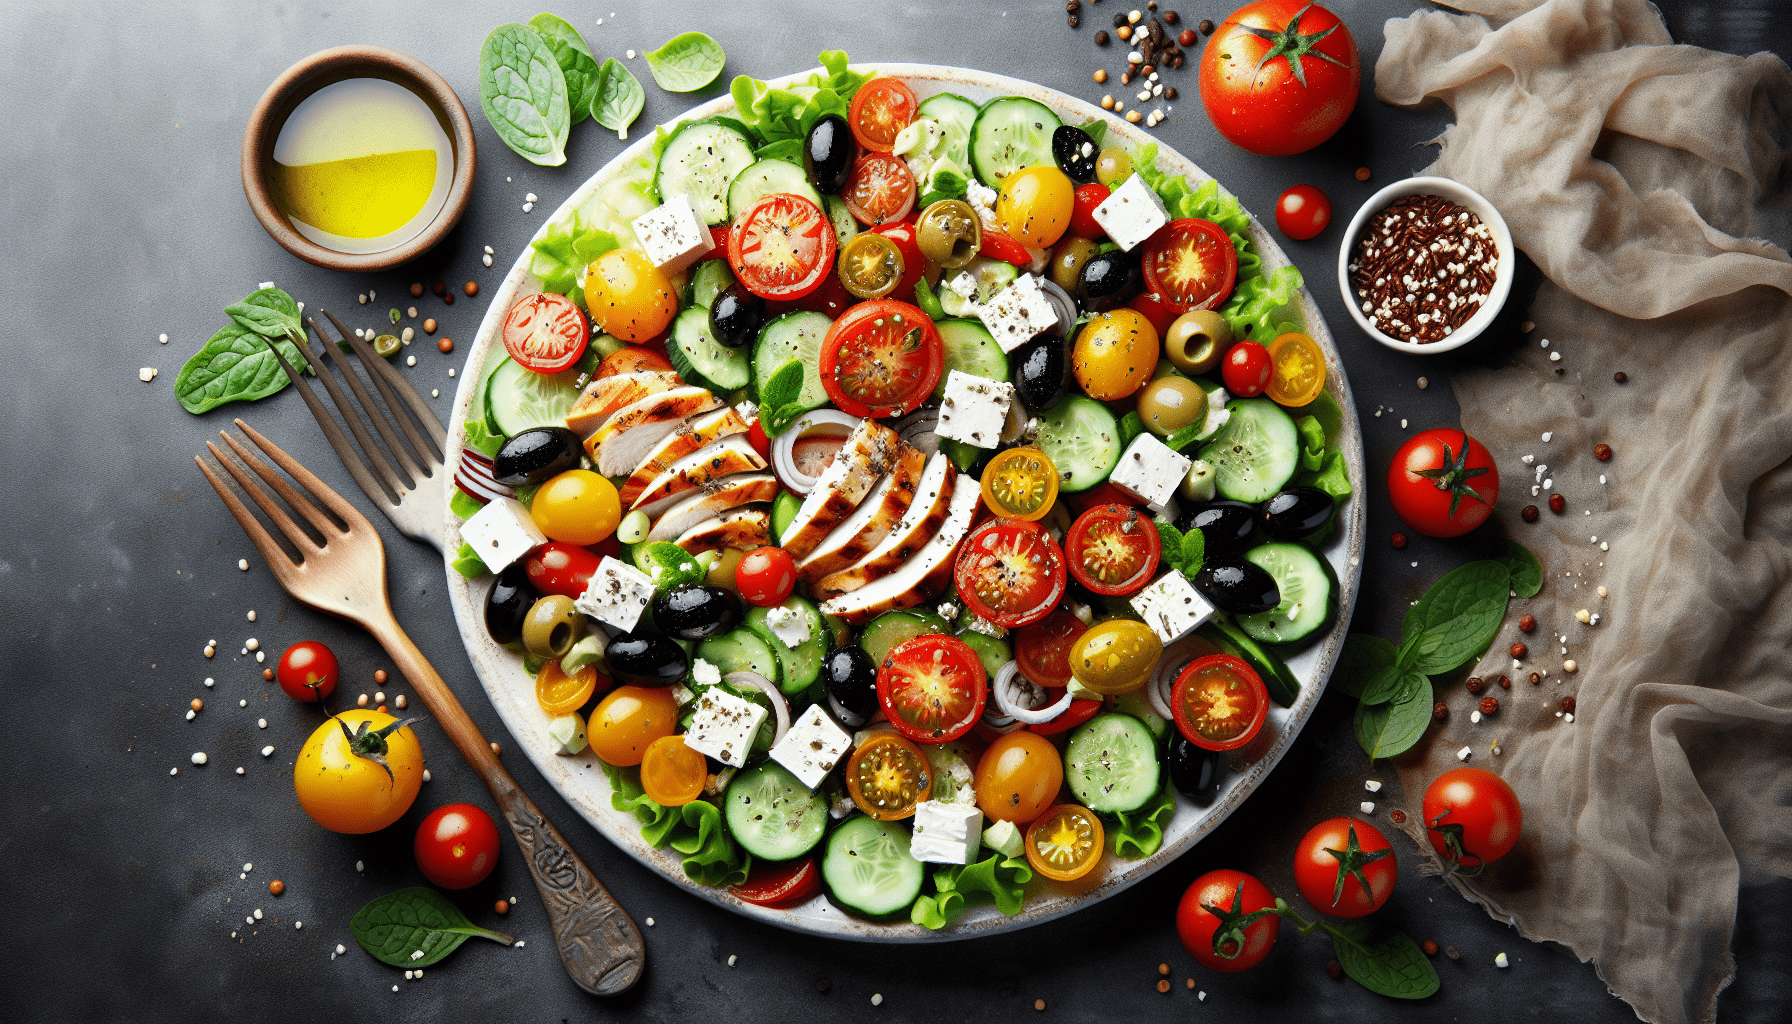 Whats Your Healthy Twist On A Classic Greek Salad?